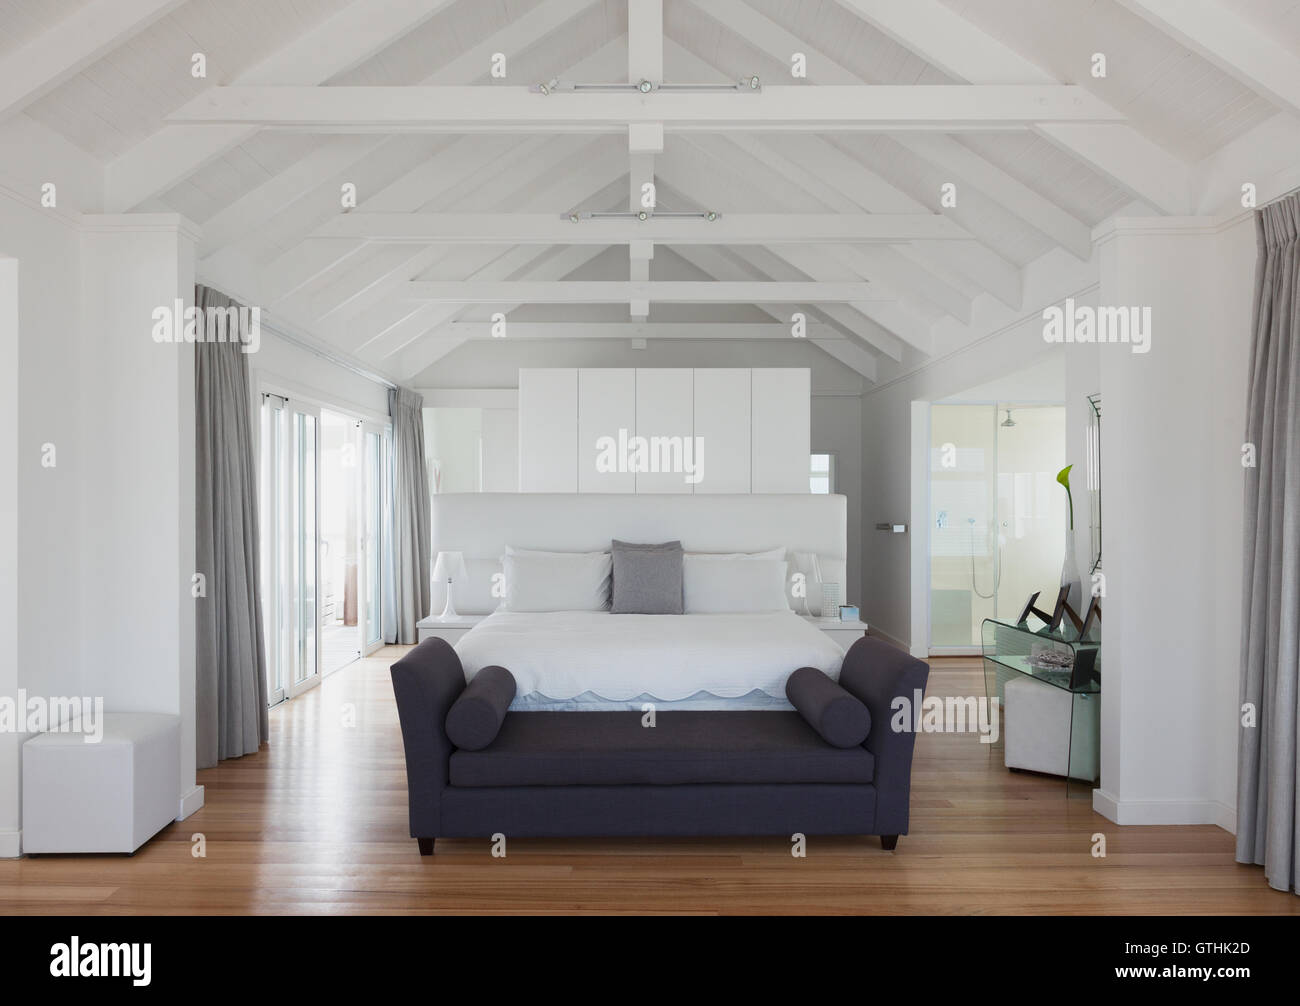 White Vaulted Wood Beam Ceiling Over Bed In Home Showcase Interior